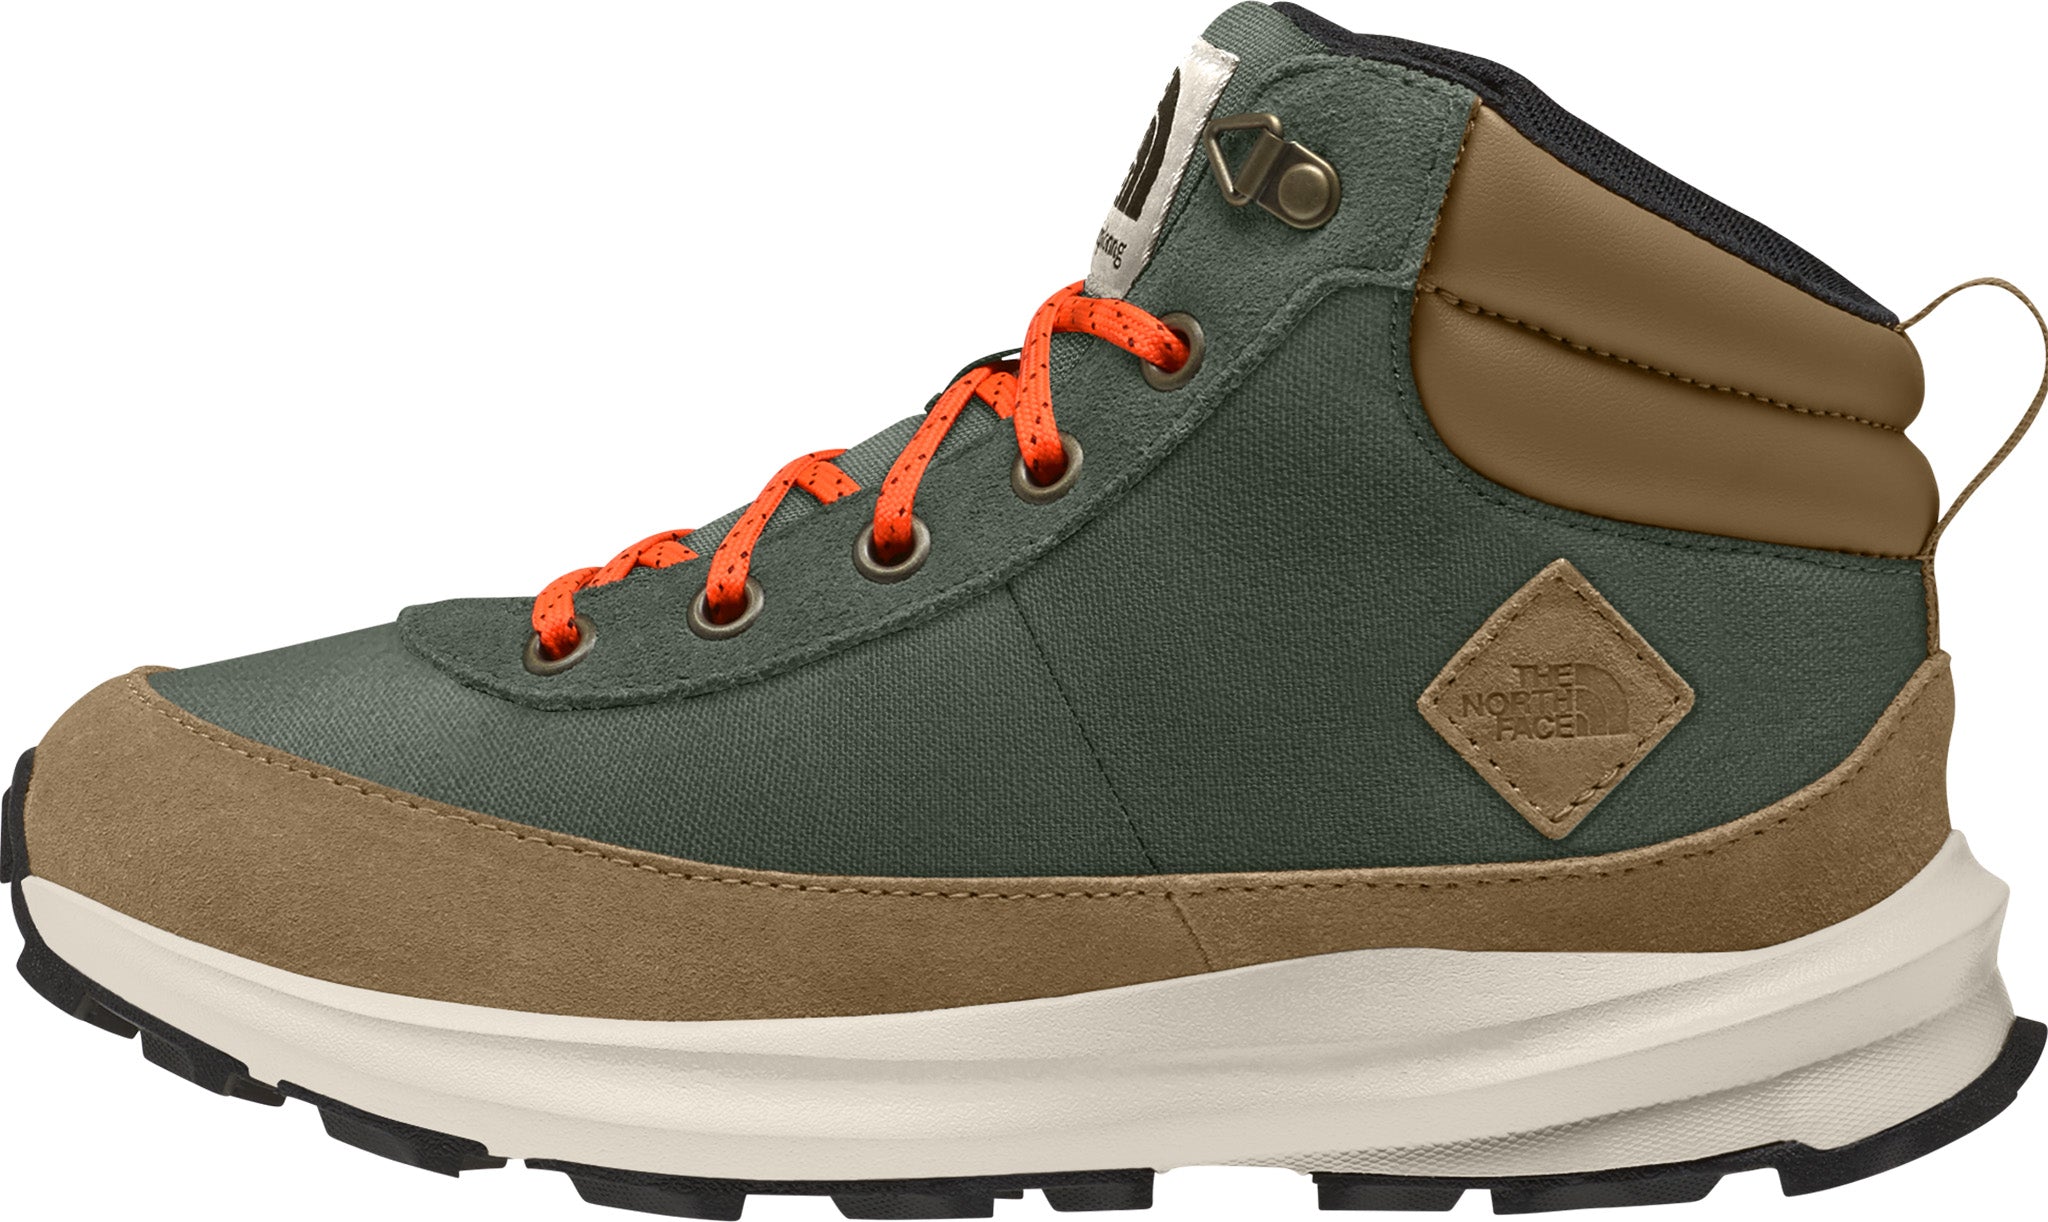 The North Face Back-To-Berkeley IV Hiker Shoes - Youth | Altitude Sports